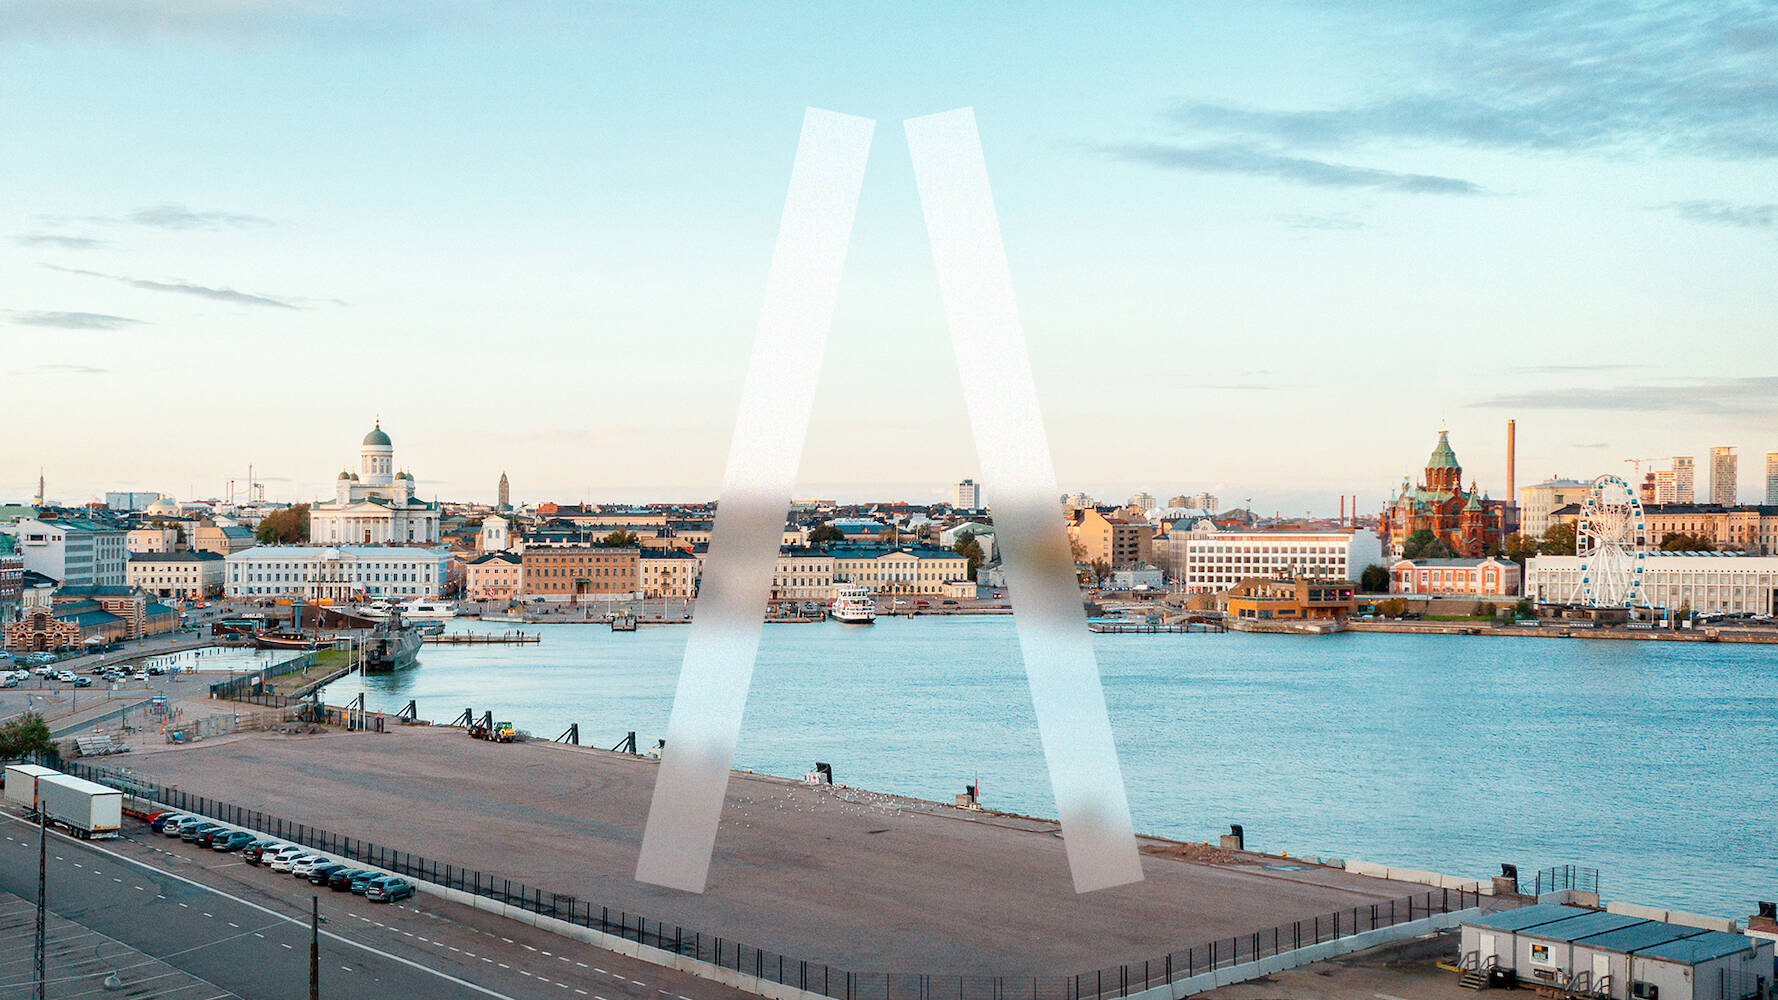 Design Competition Seeks Proposals for Architecture and Design Museum on the Helsinki Waterfront